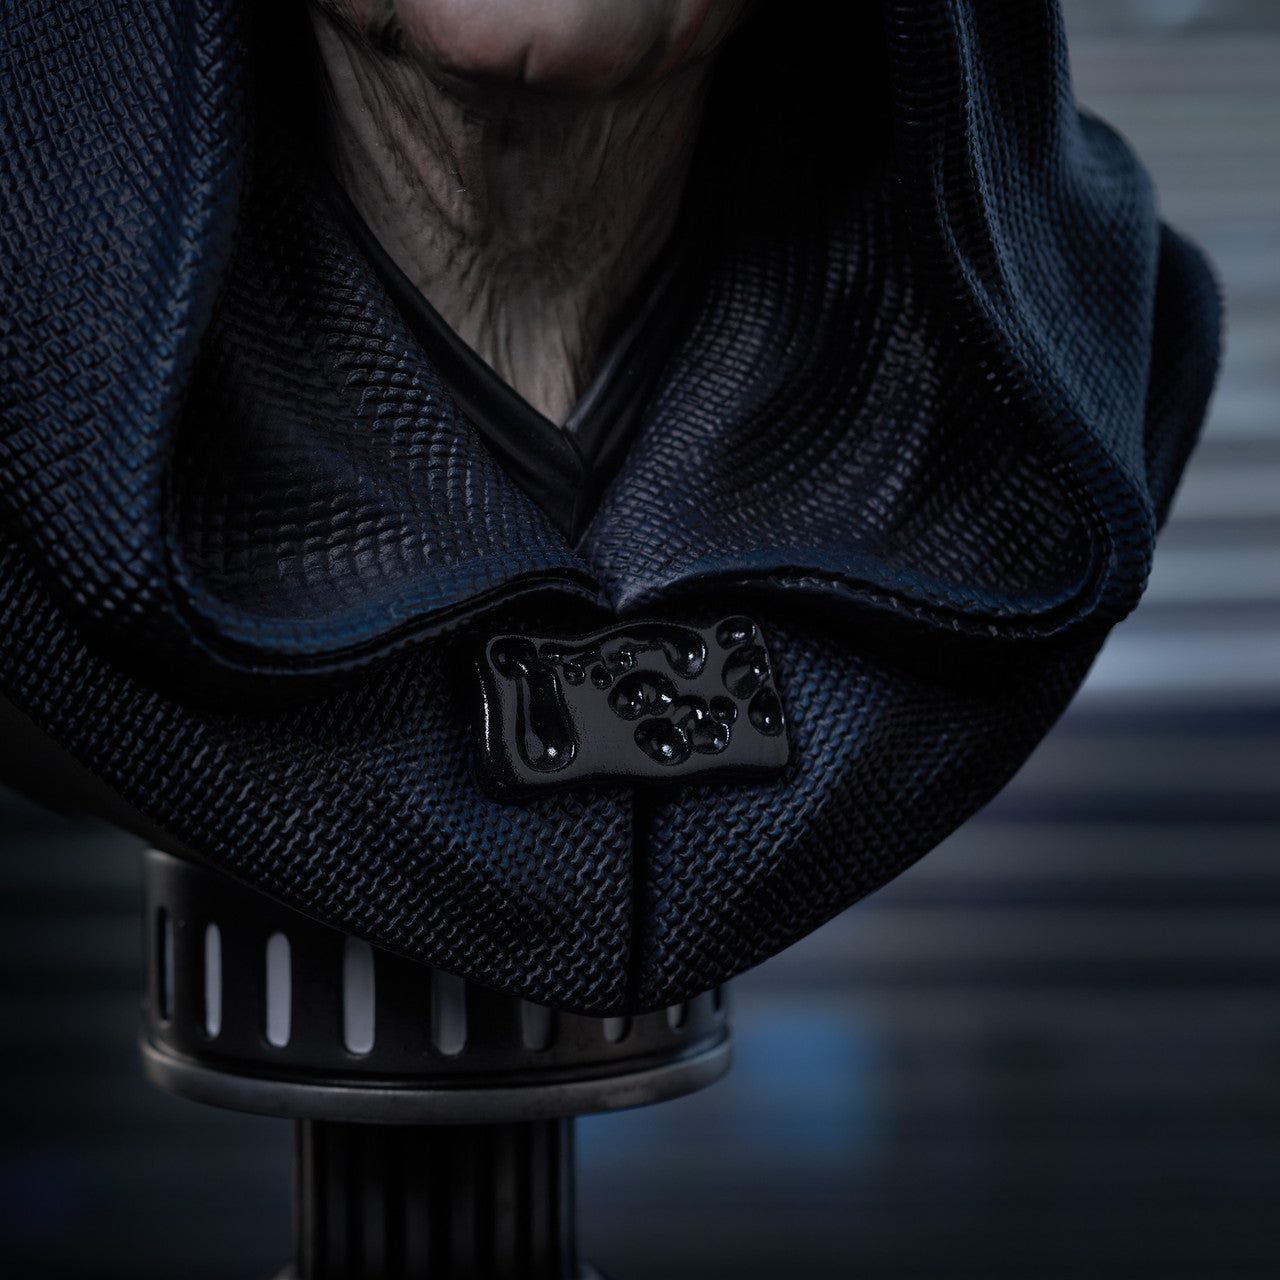 Star Wars: Return of the Jedi Emperor Palpatine Legends in 3D 1:2 Scale Bust by Diamond Gallery -Diamond Gallery - India - www.superherotoystore.com